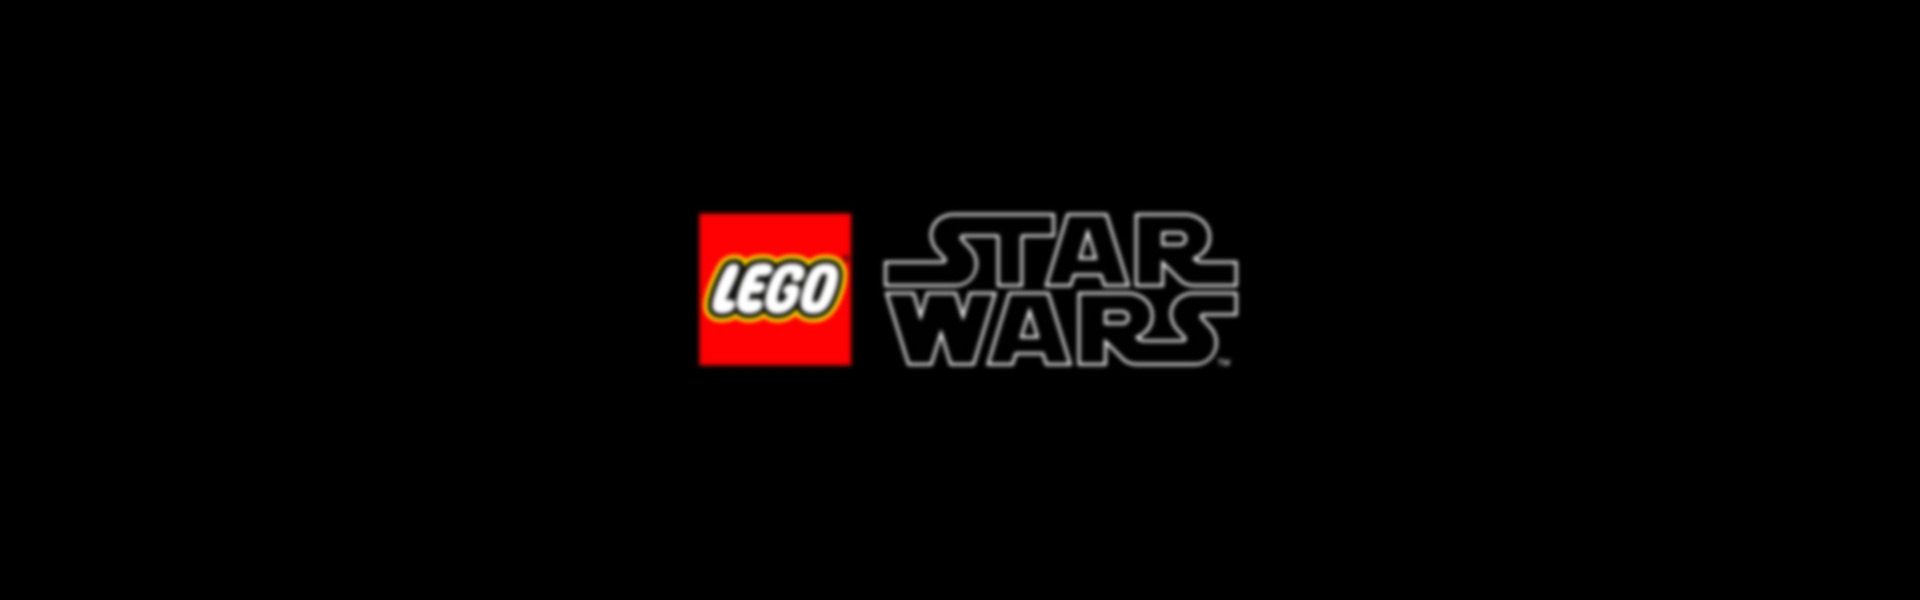 Chewbacca™ 75371 | Star Wars™ | Buy online at the Official LEGO 